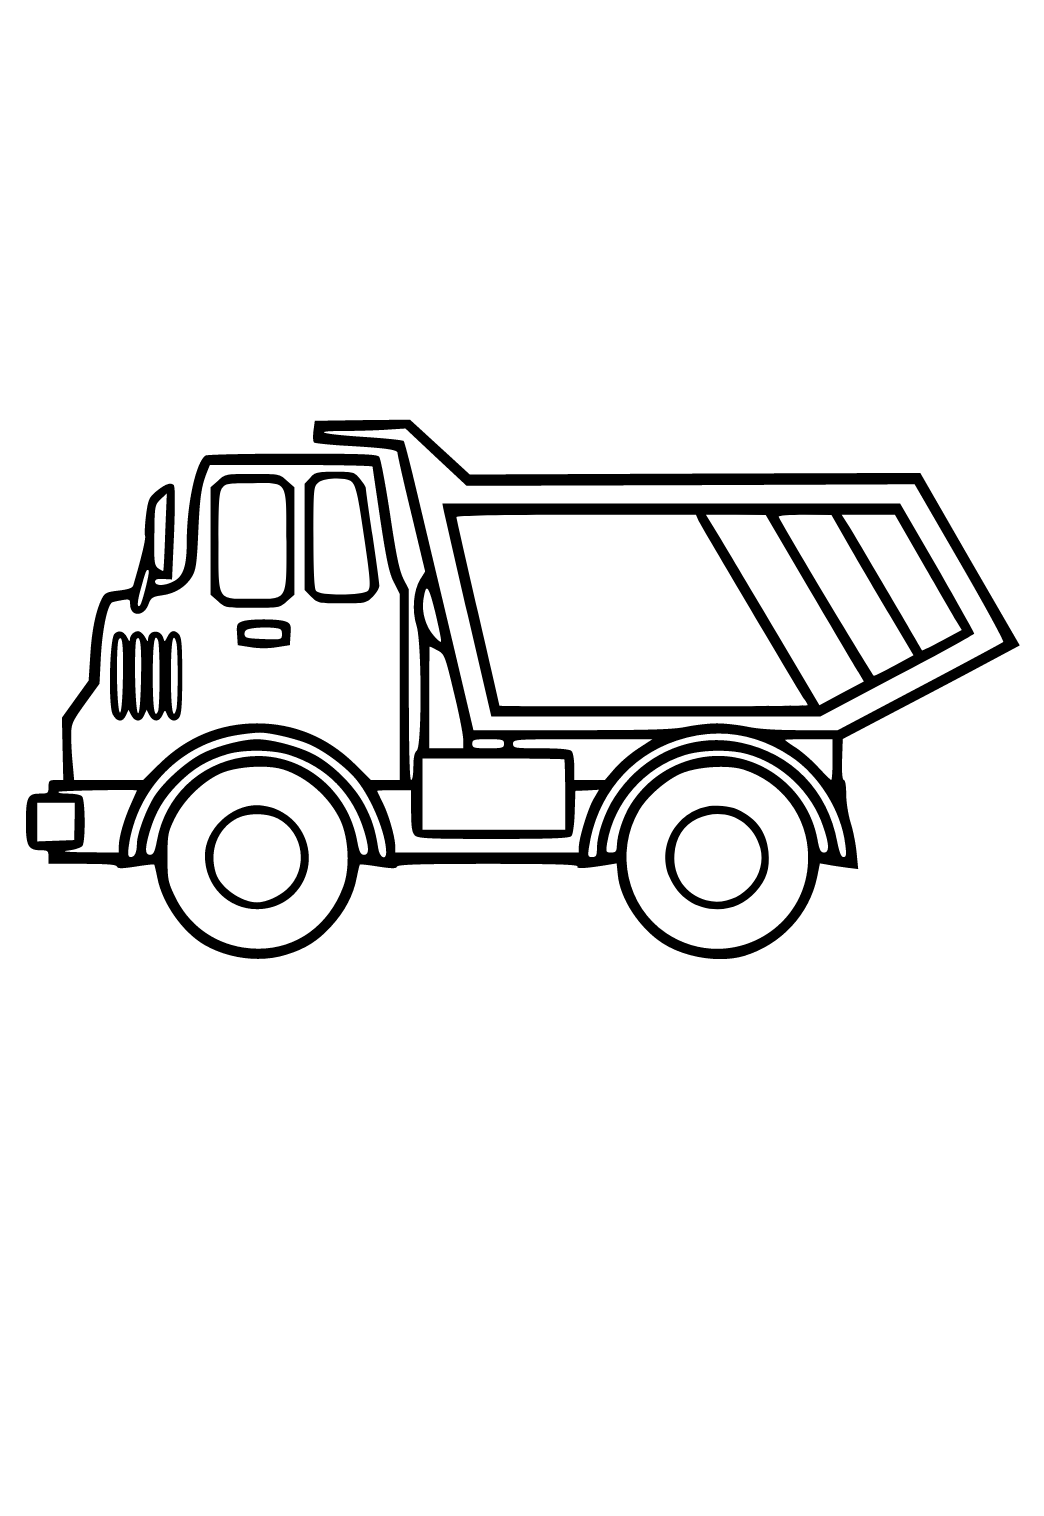 Free printable dump truck easy coloring page for adults and kids